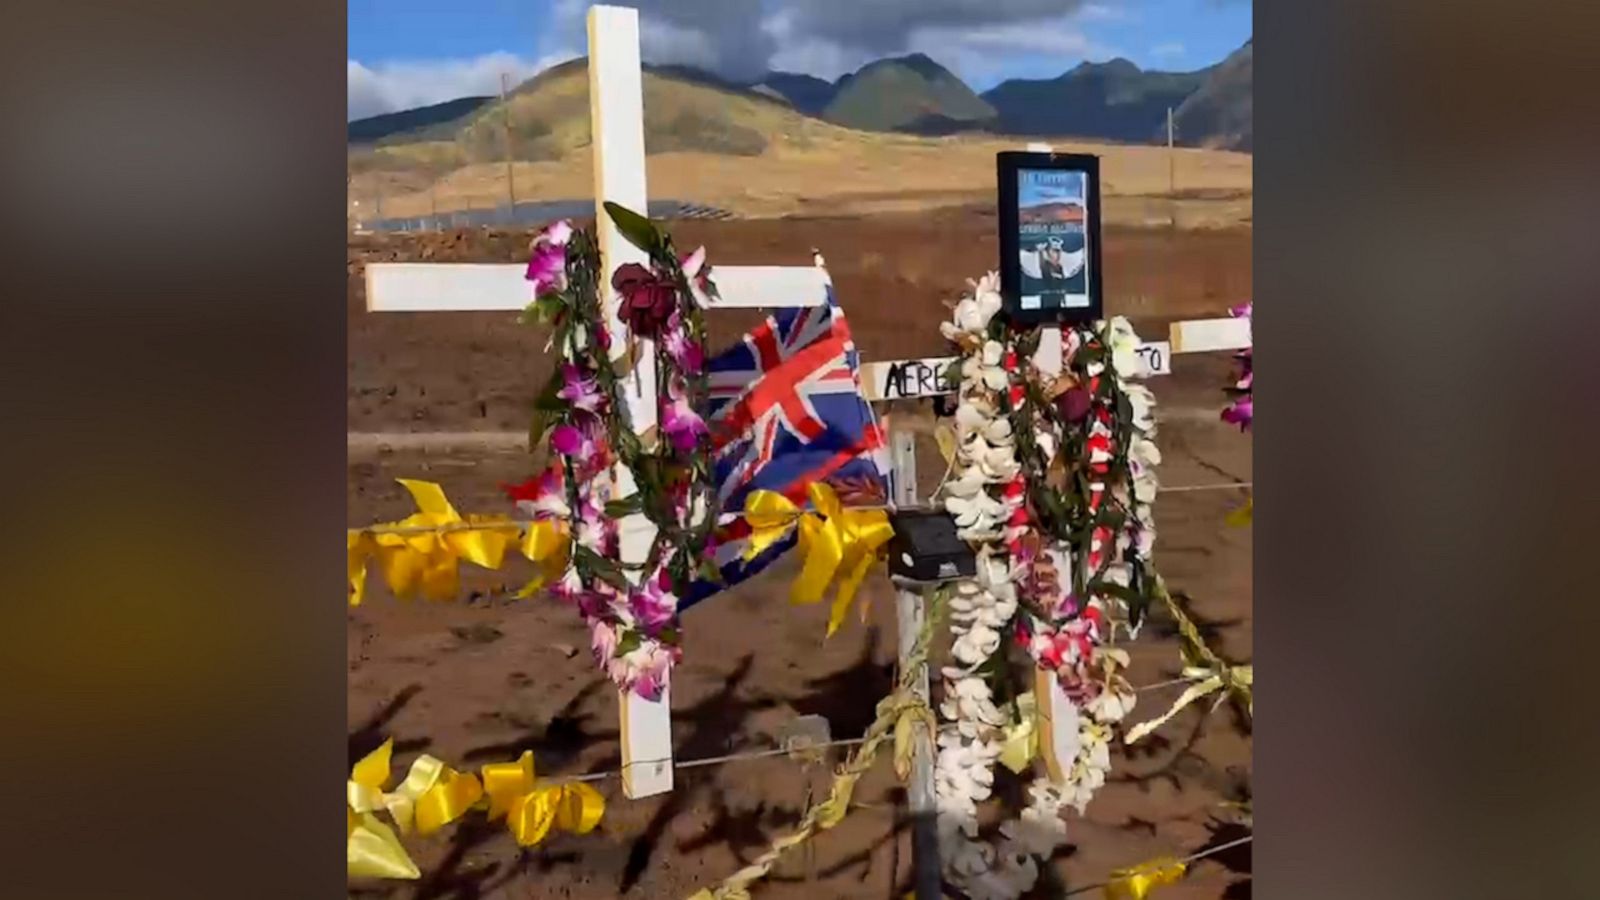 VIDEO: The story behind the crosses honoring those lost in the Maui fires